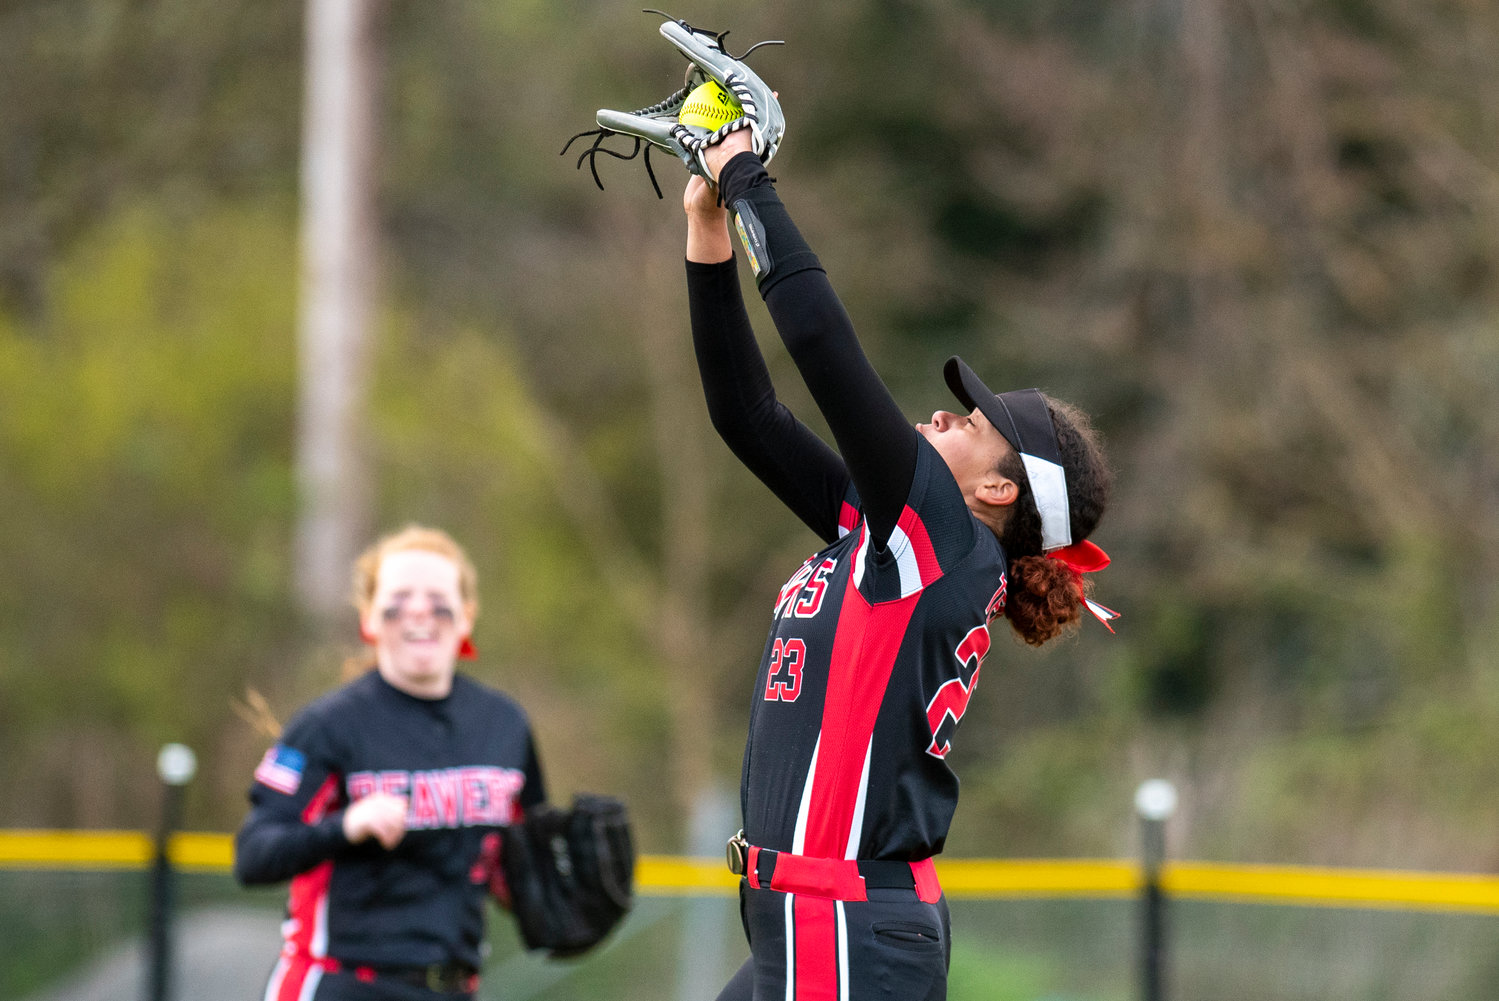 Tenino senior Alivia Hunter makes a catch on a flyball in right field against Elma at home on April 26.